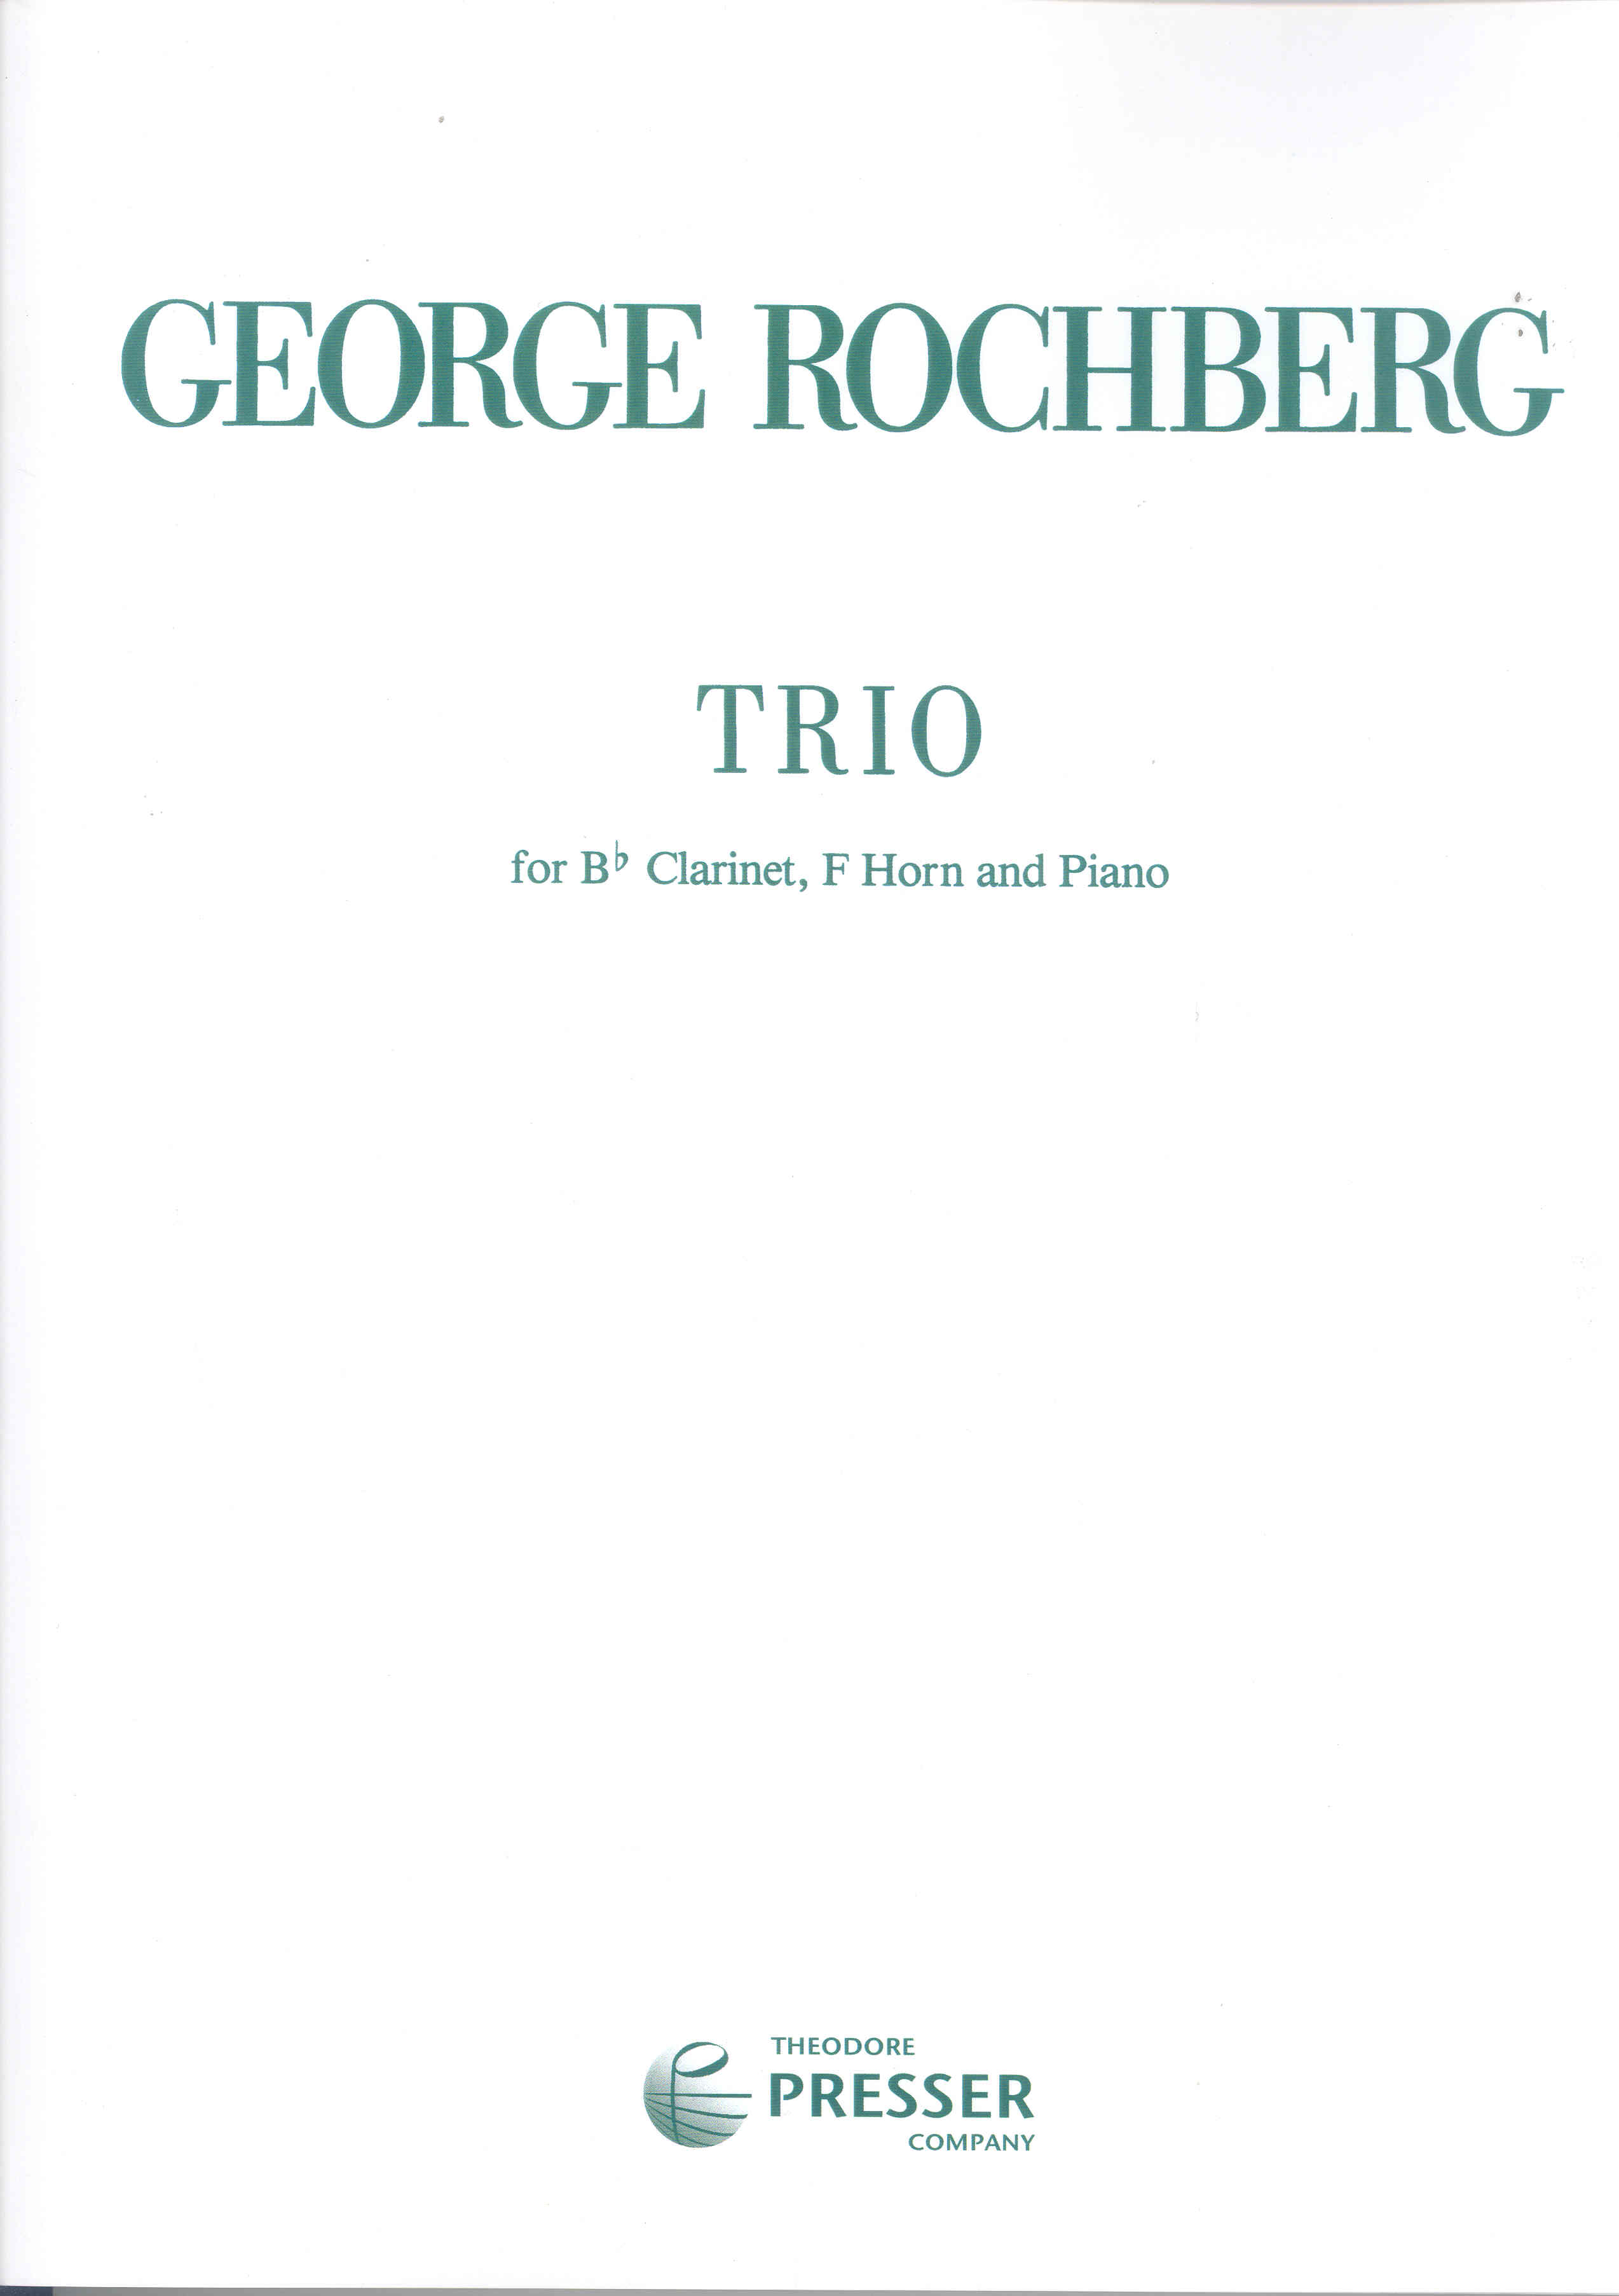 Rochberg Trio For Clarinet Horn & Piano Score/pts Sheet Music Songbook